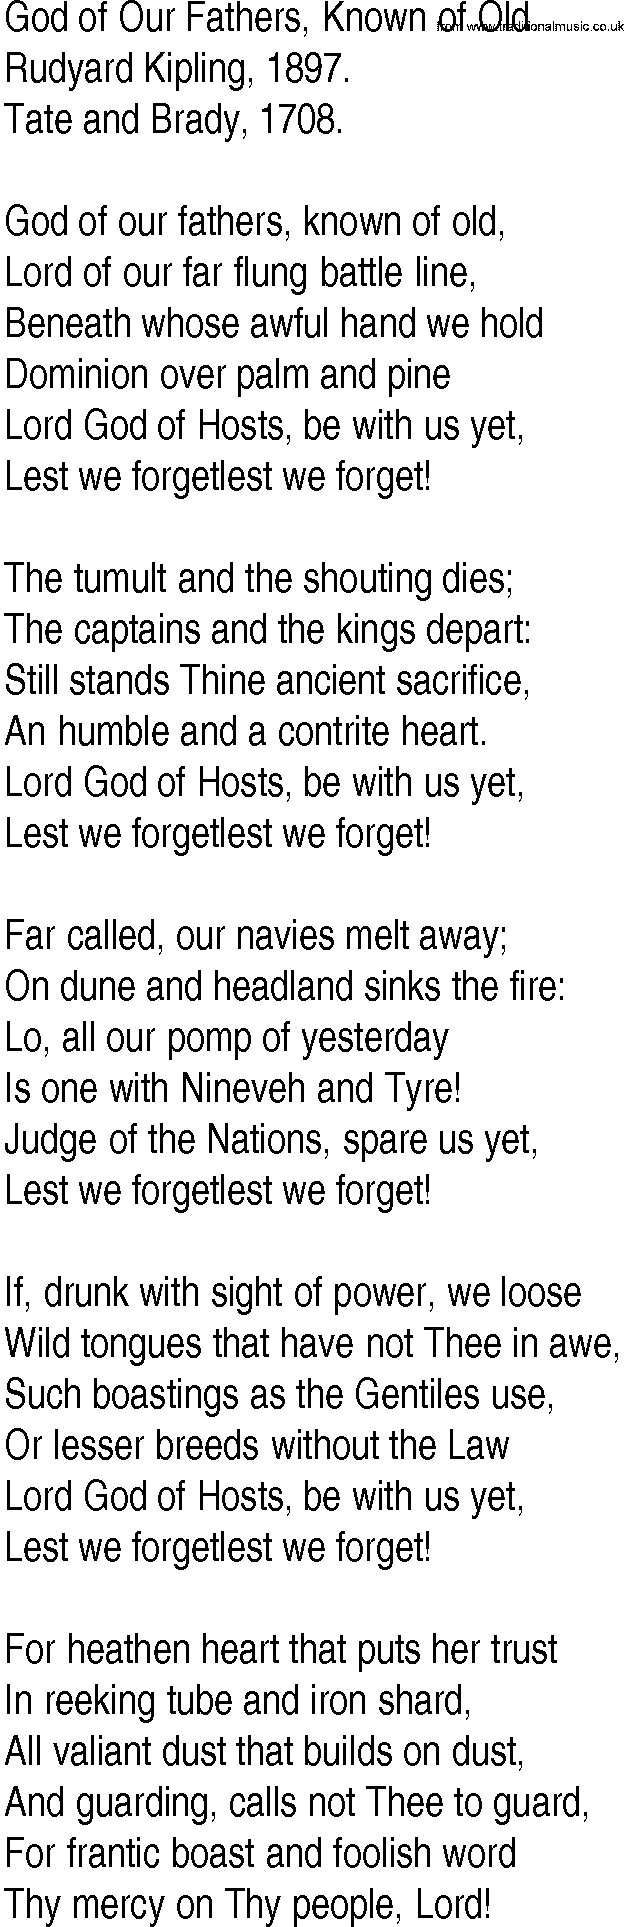 Hymn and Gospel Song: God of Our Fathers, Known of Old by Rudyard Kipling lyrics